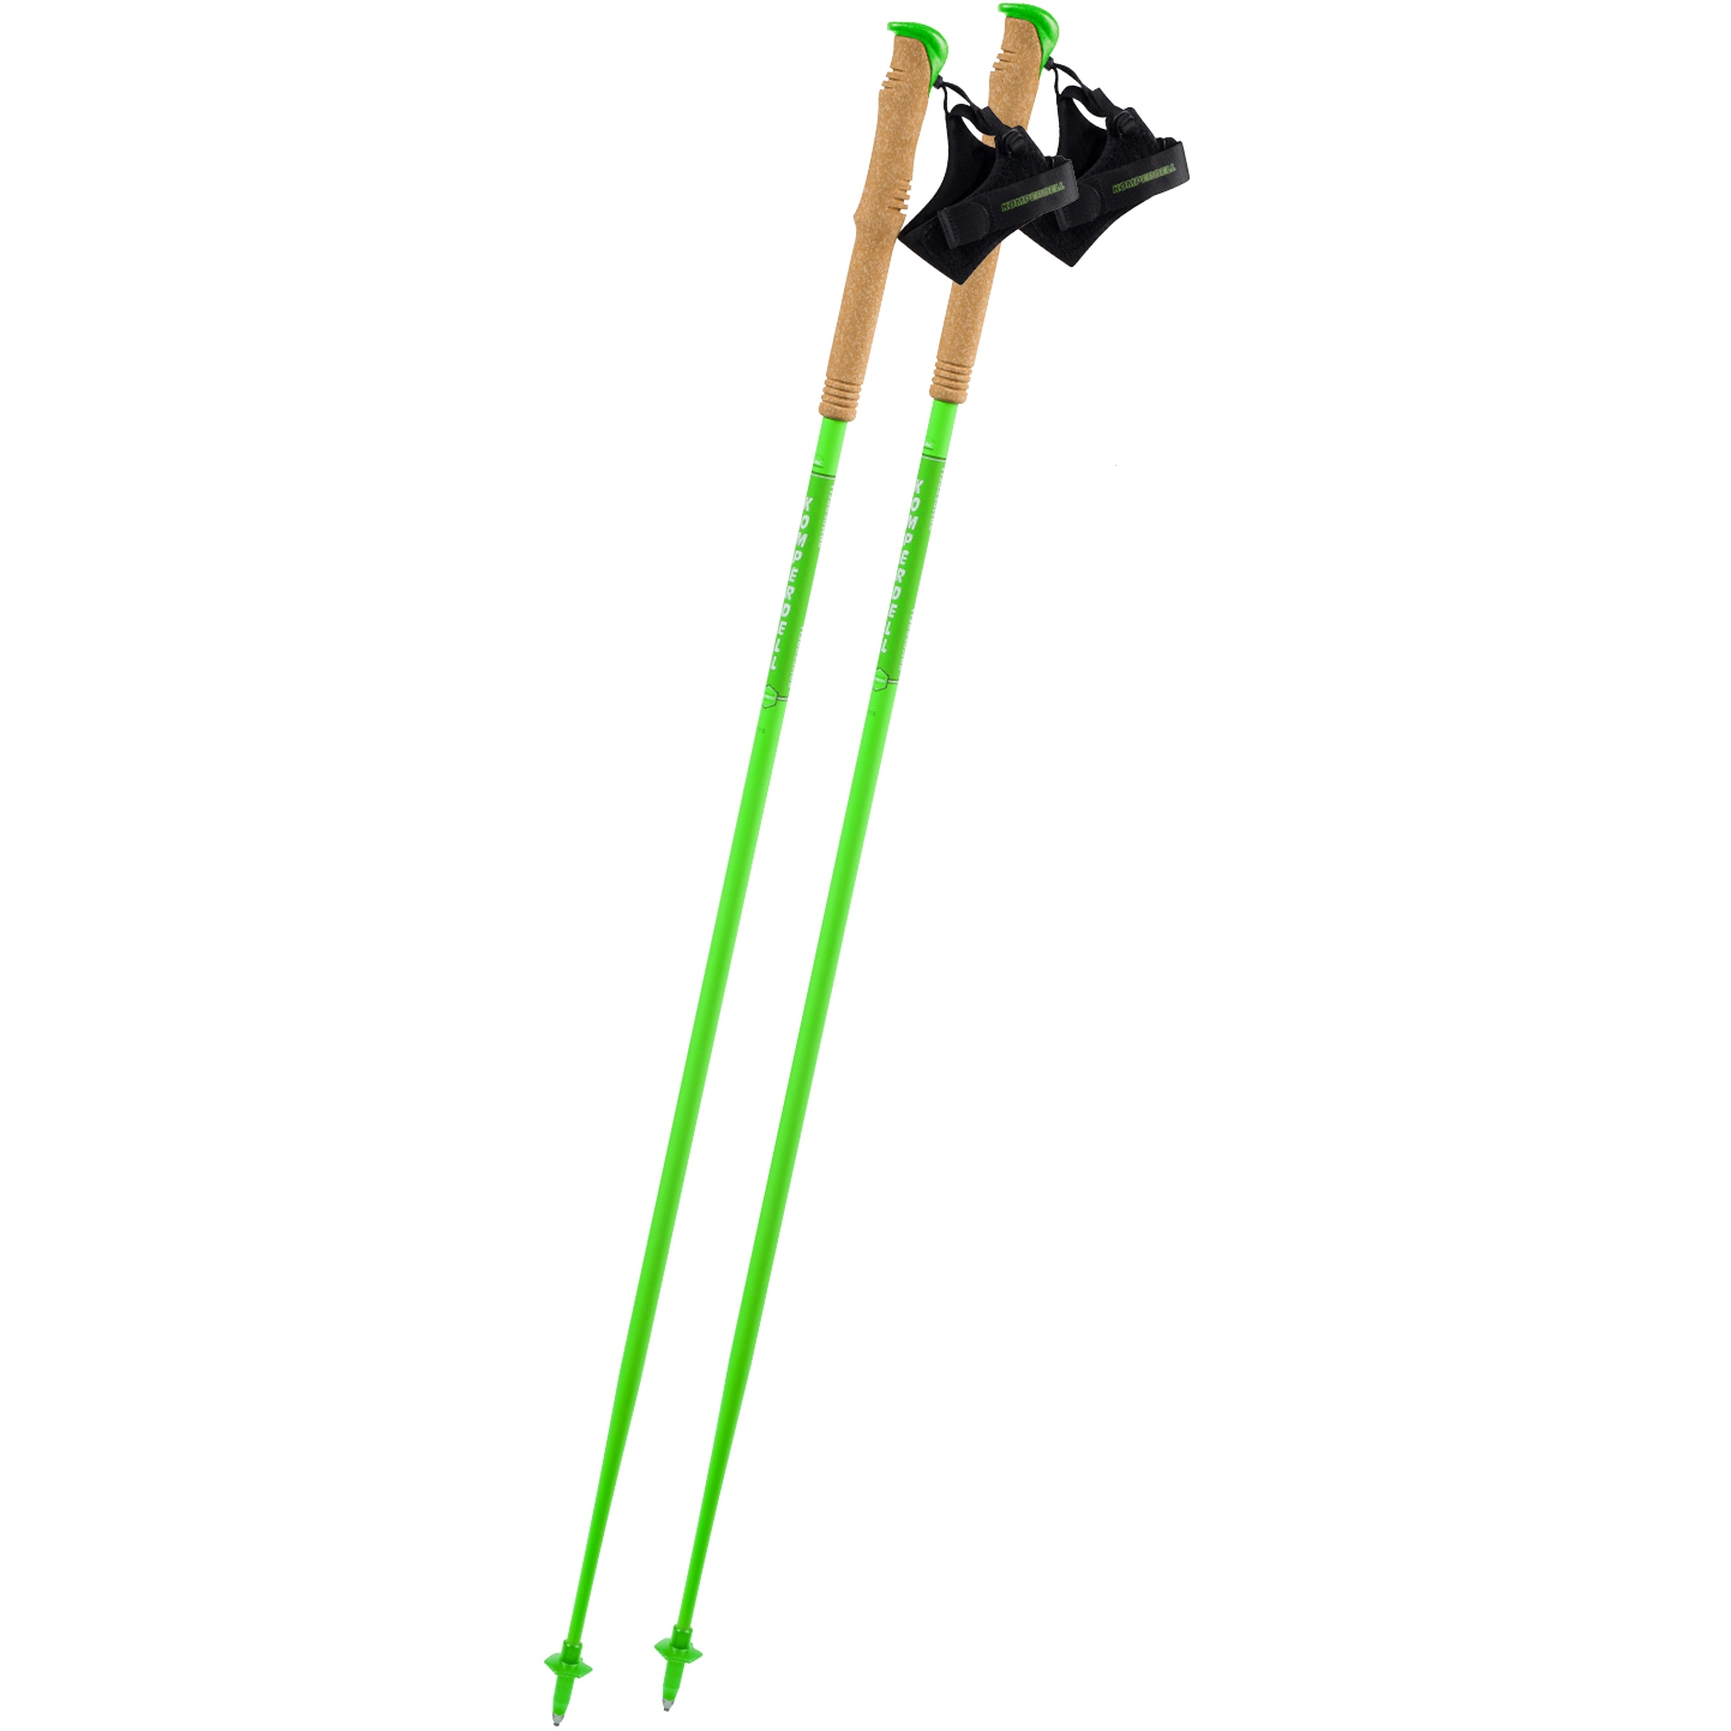 Picture of Komperdell Carbon C1 Team Green Trailrunning Poles (Pair) - green